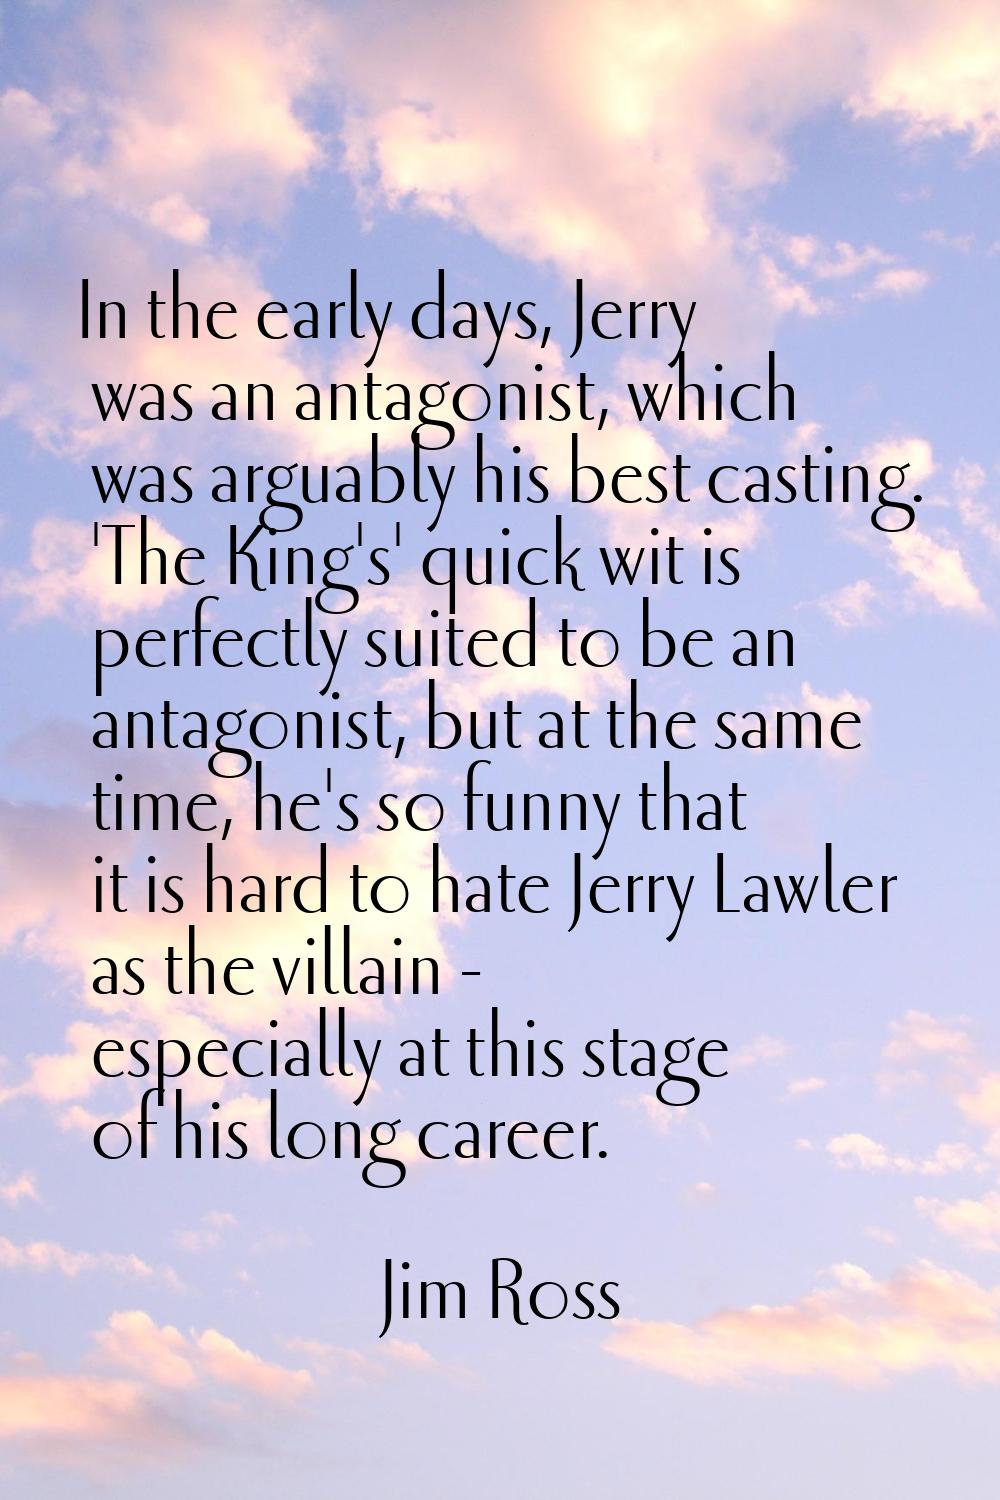 In the early days, Jerry was an antagonist, which was arguably his best casting. 'The King's' quick